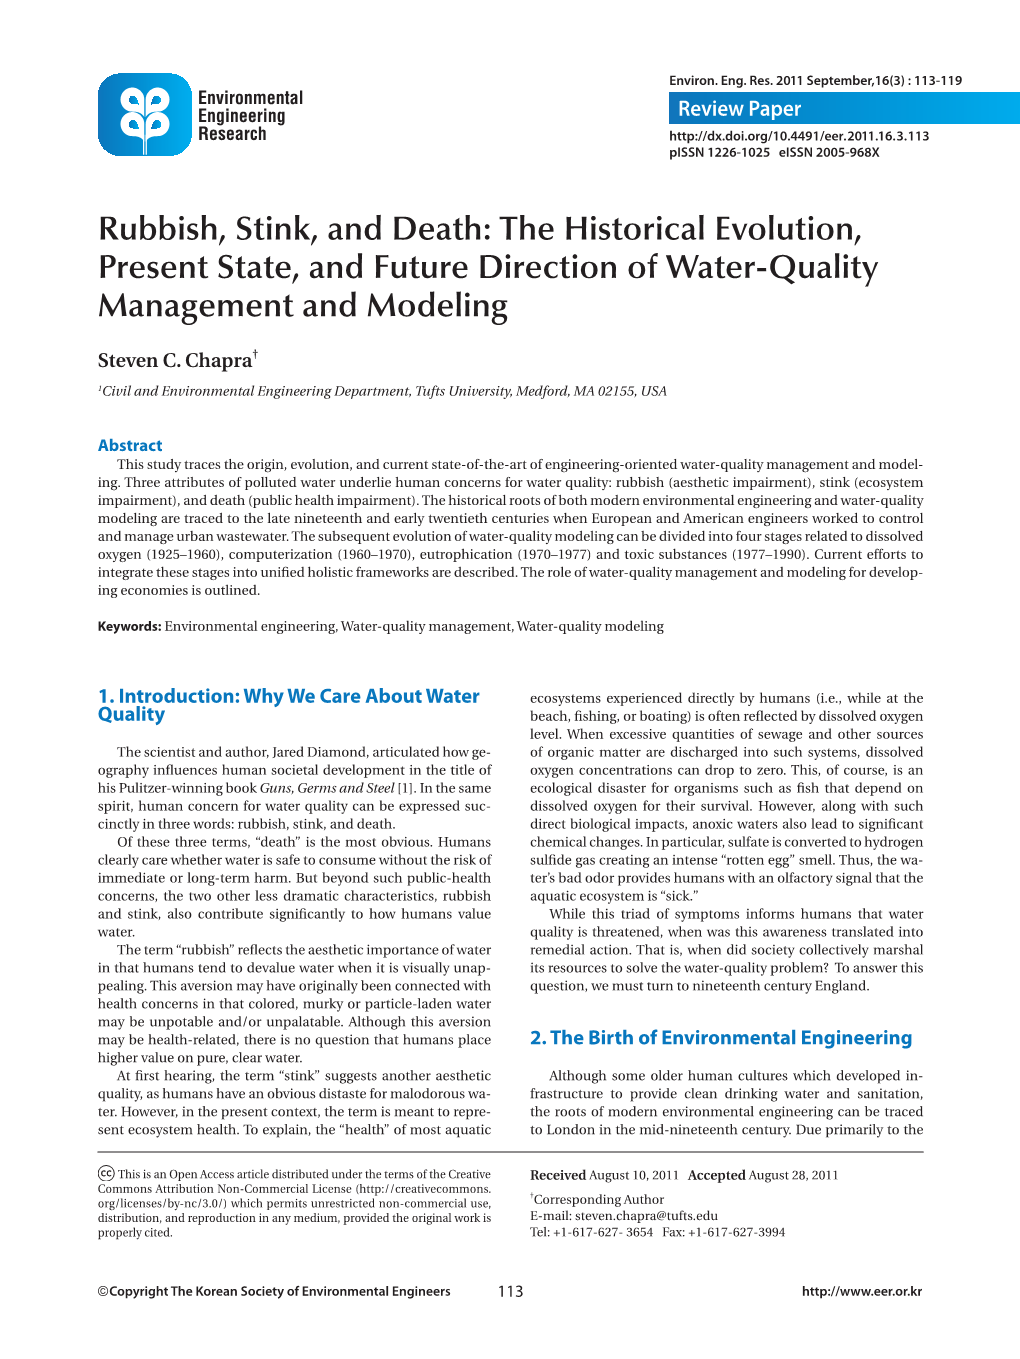 Rubbish, Stink, and Death: the Historical Evolution, Present State, and Future Direction of Water-Quality Management and Modeling